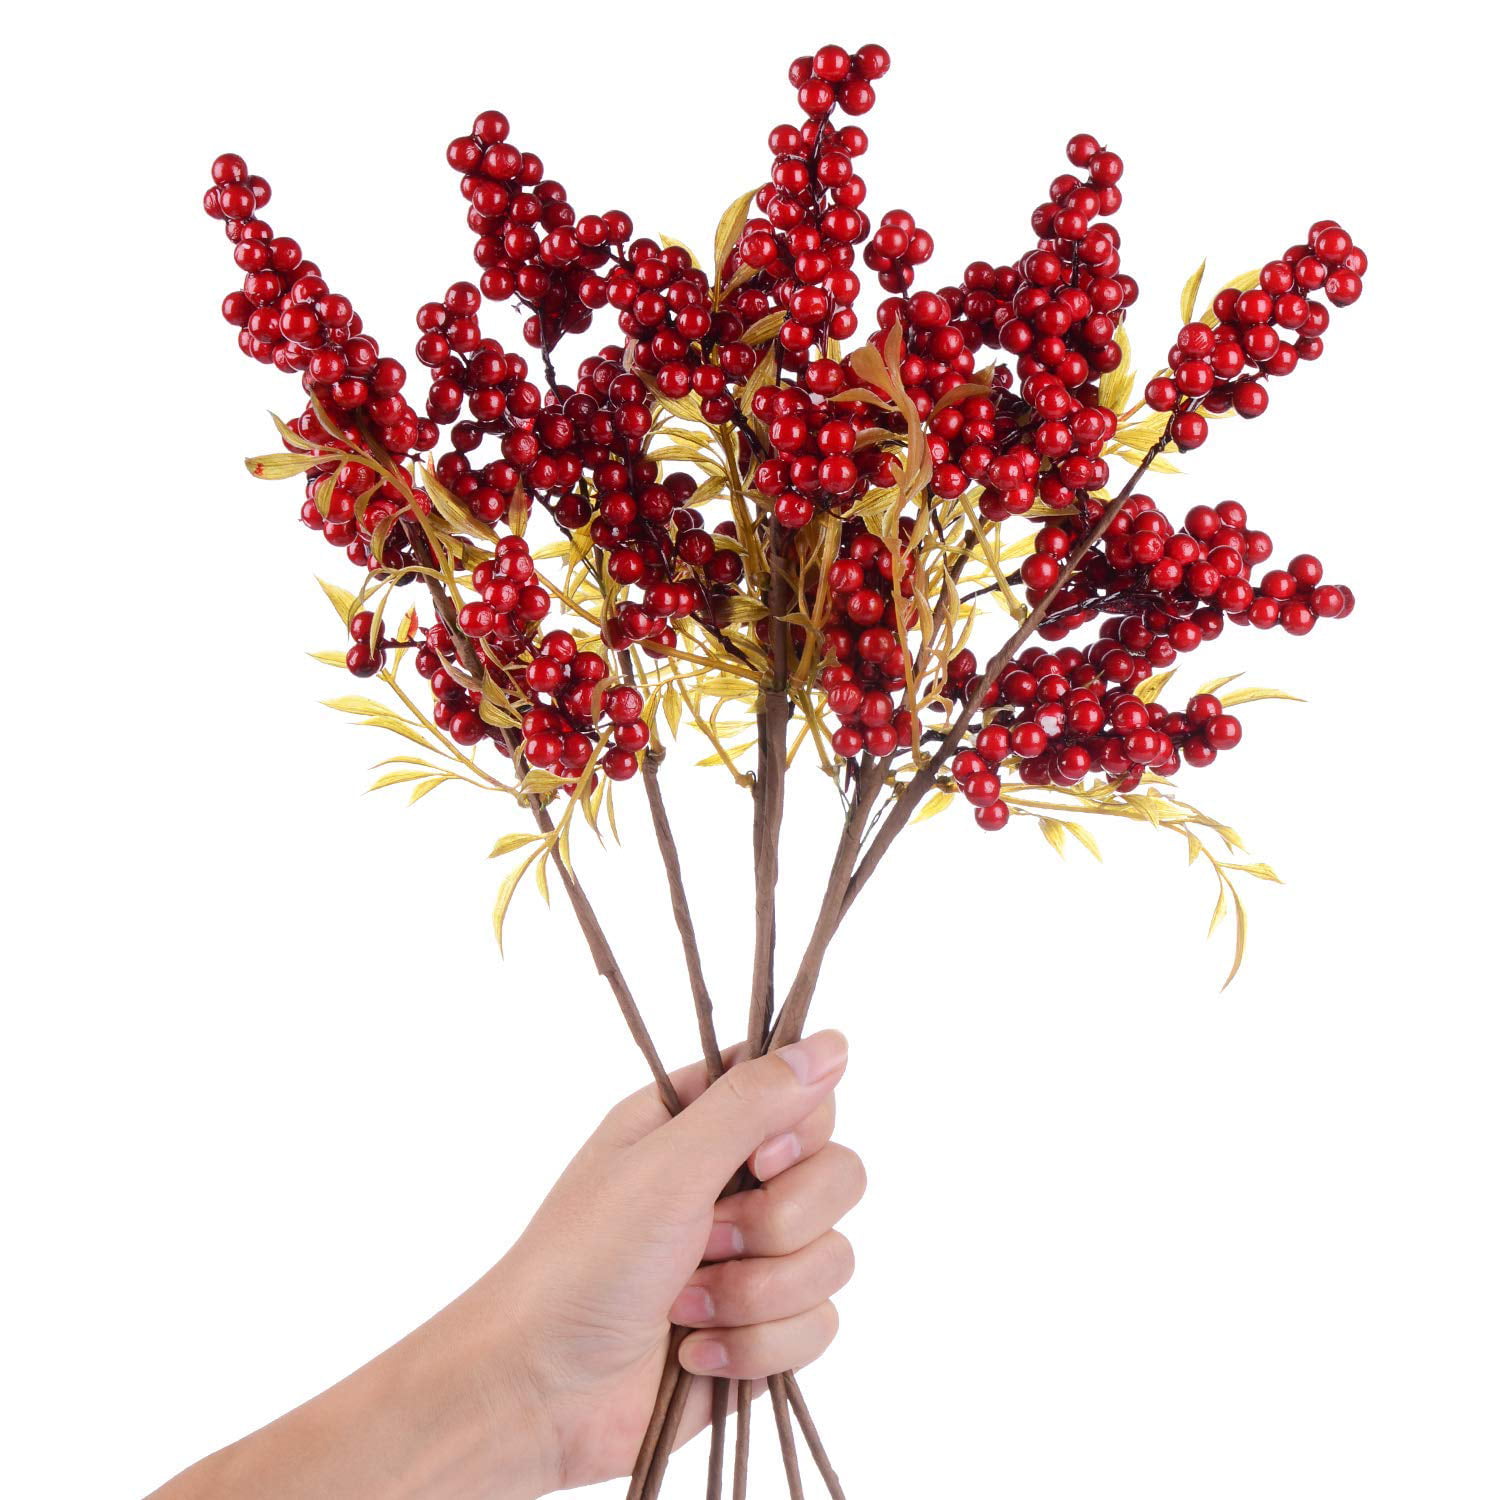 LLZLL 6Pack Christmas Floral Picks Artificial Red Berry Stems 17inch Christmas Berry Picks with Holly Berries for Xmas Winter Holiday Home DIY